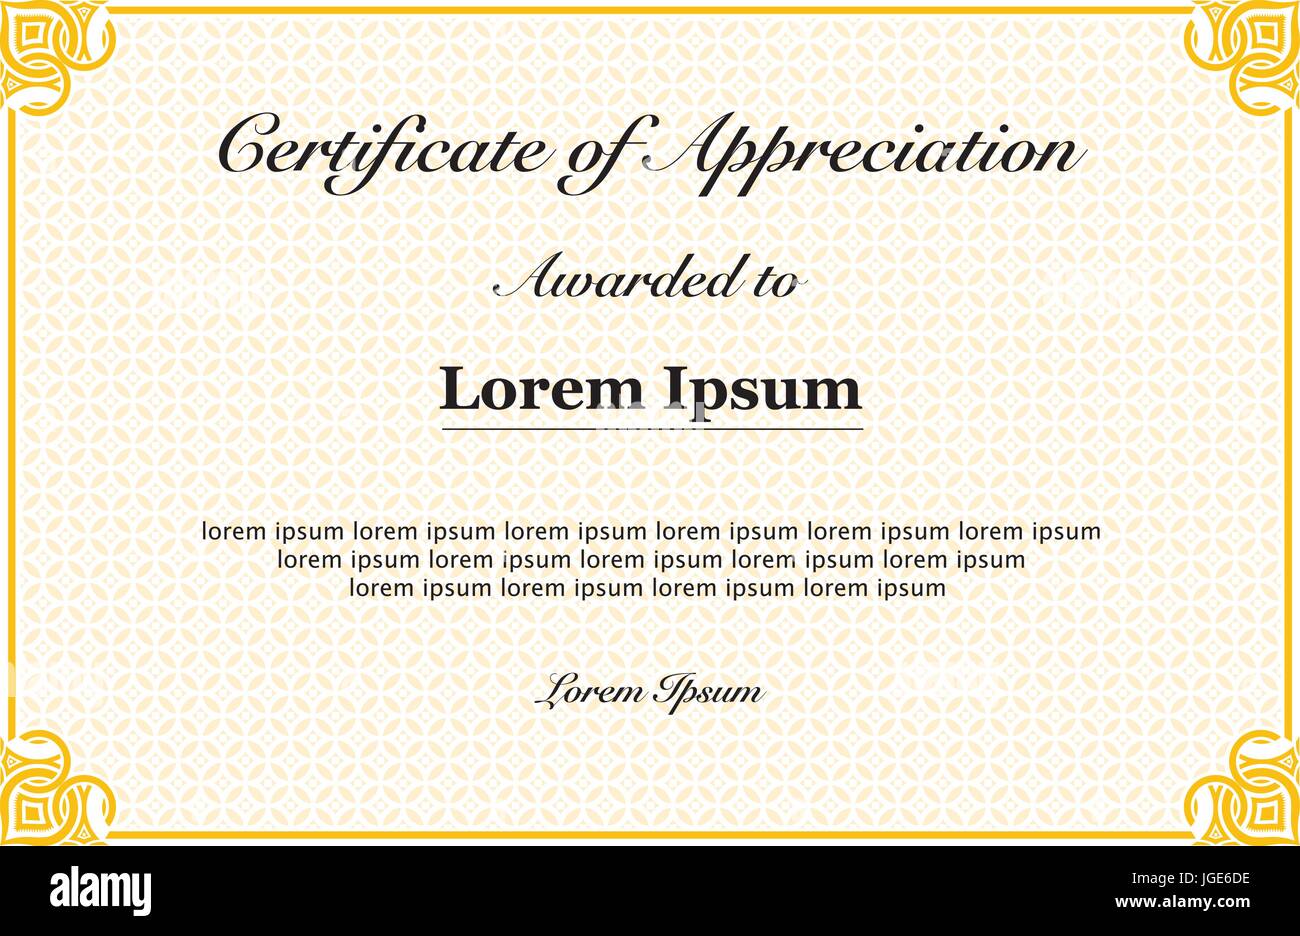 Certificate of Appreciation Ready for Print also blank space provide Stock Vector